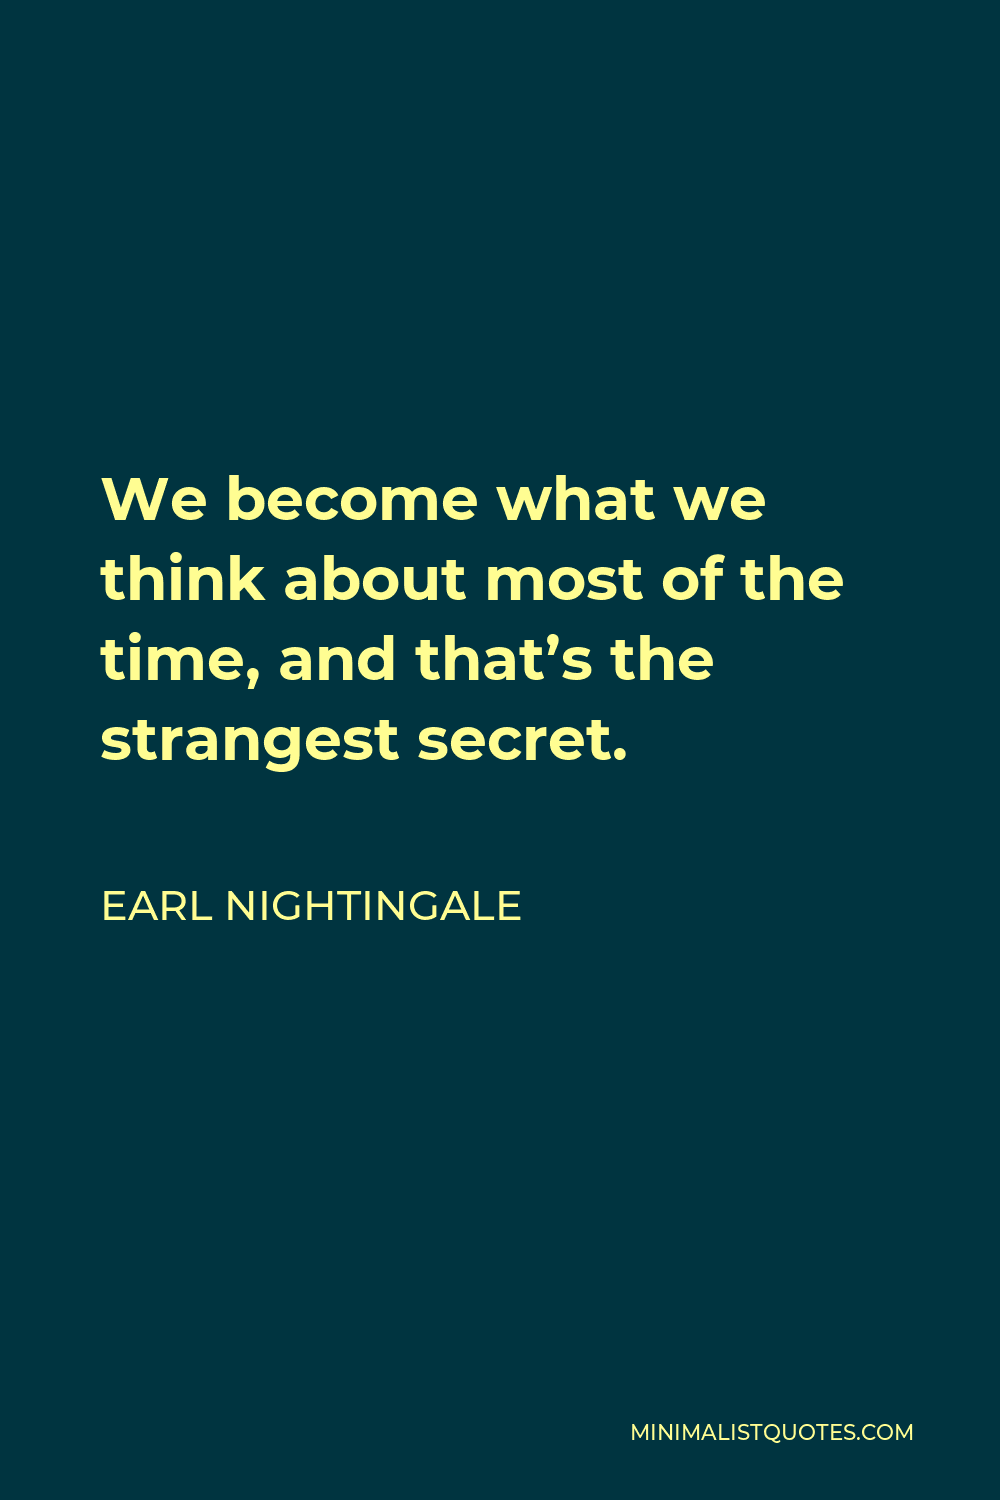 Earl Nightingale Quote - We become what we think about most of the time, and that’s the strangest secret.